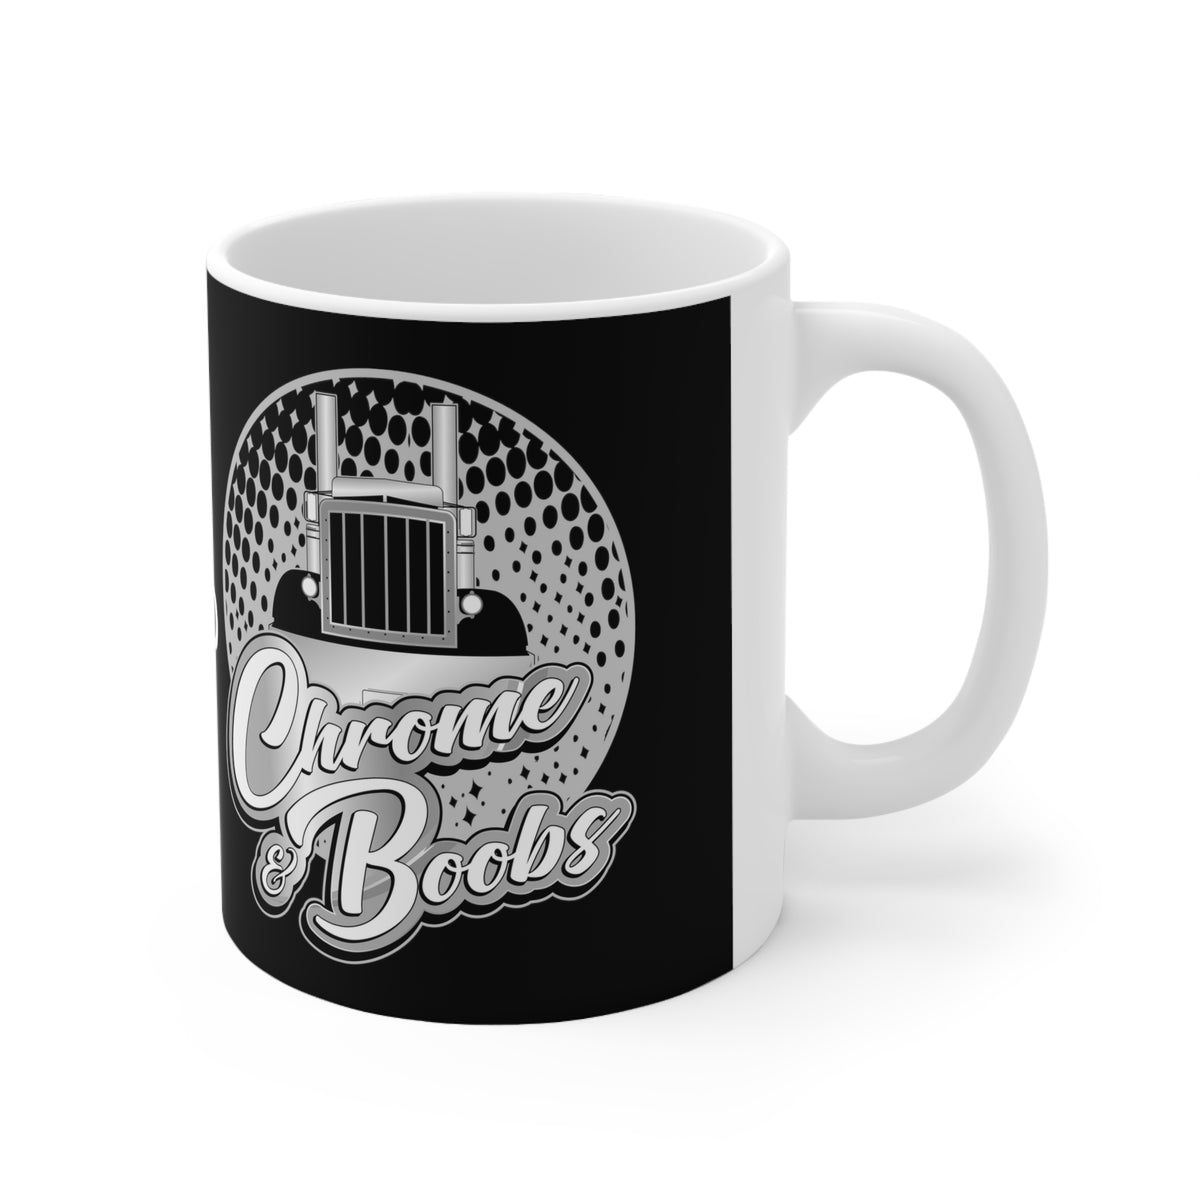 Easily Distracted by Chrome & Boobs - Peterbilt - Ceramic Mug 11oz - Free Shipping